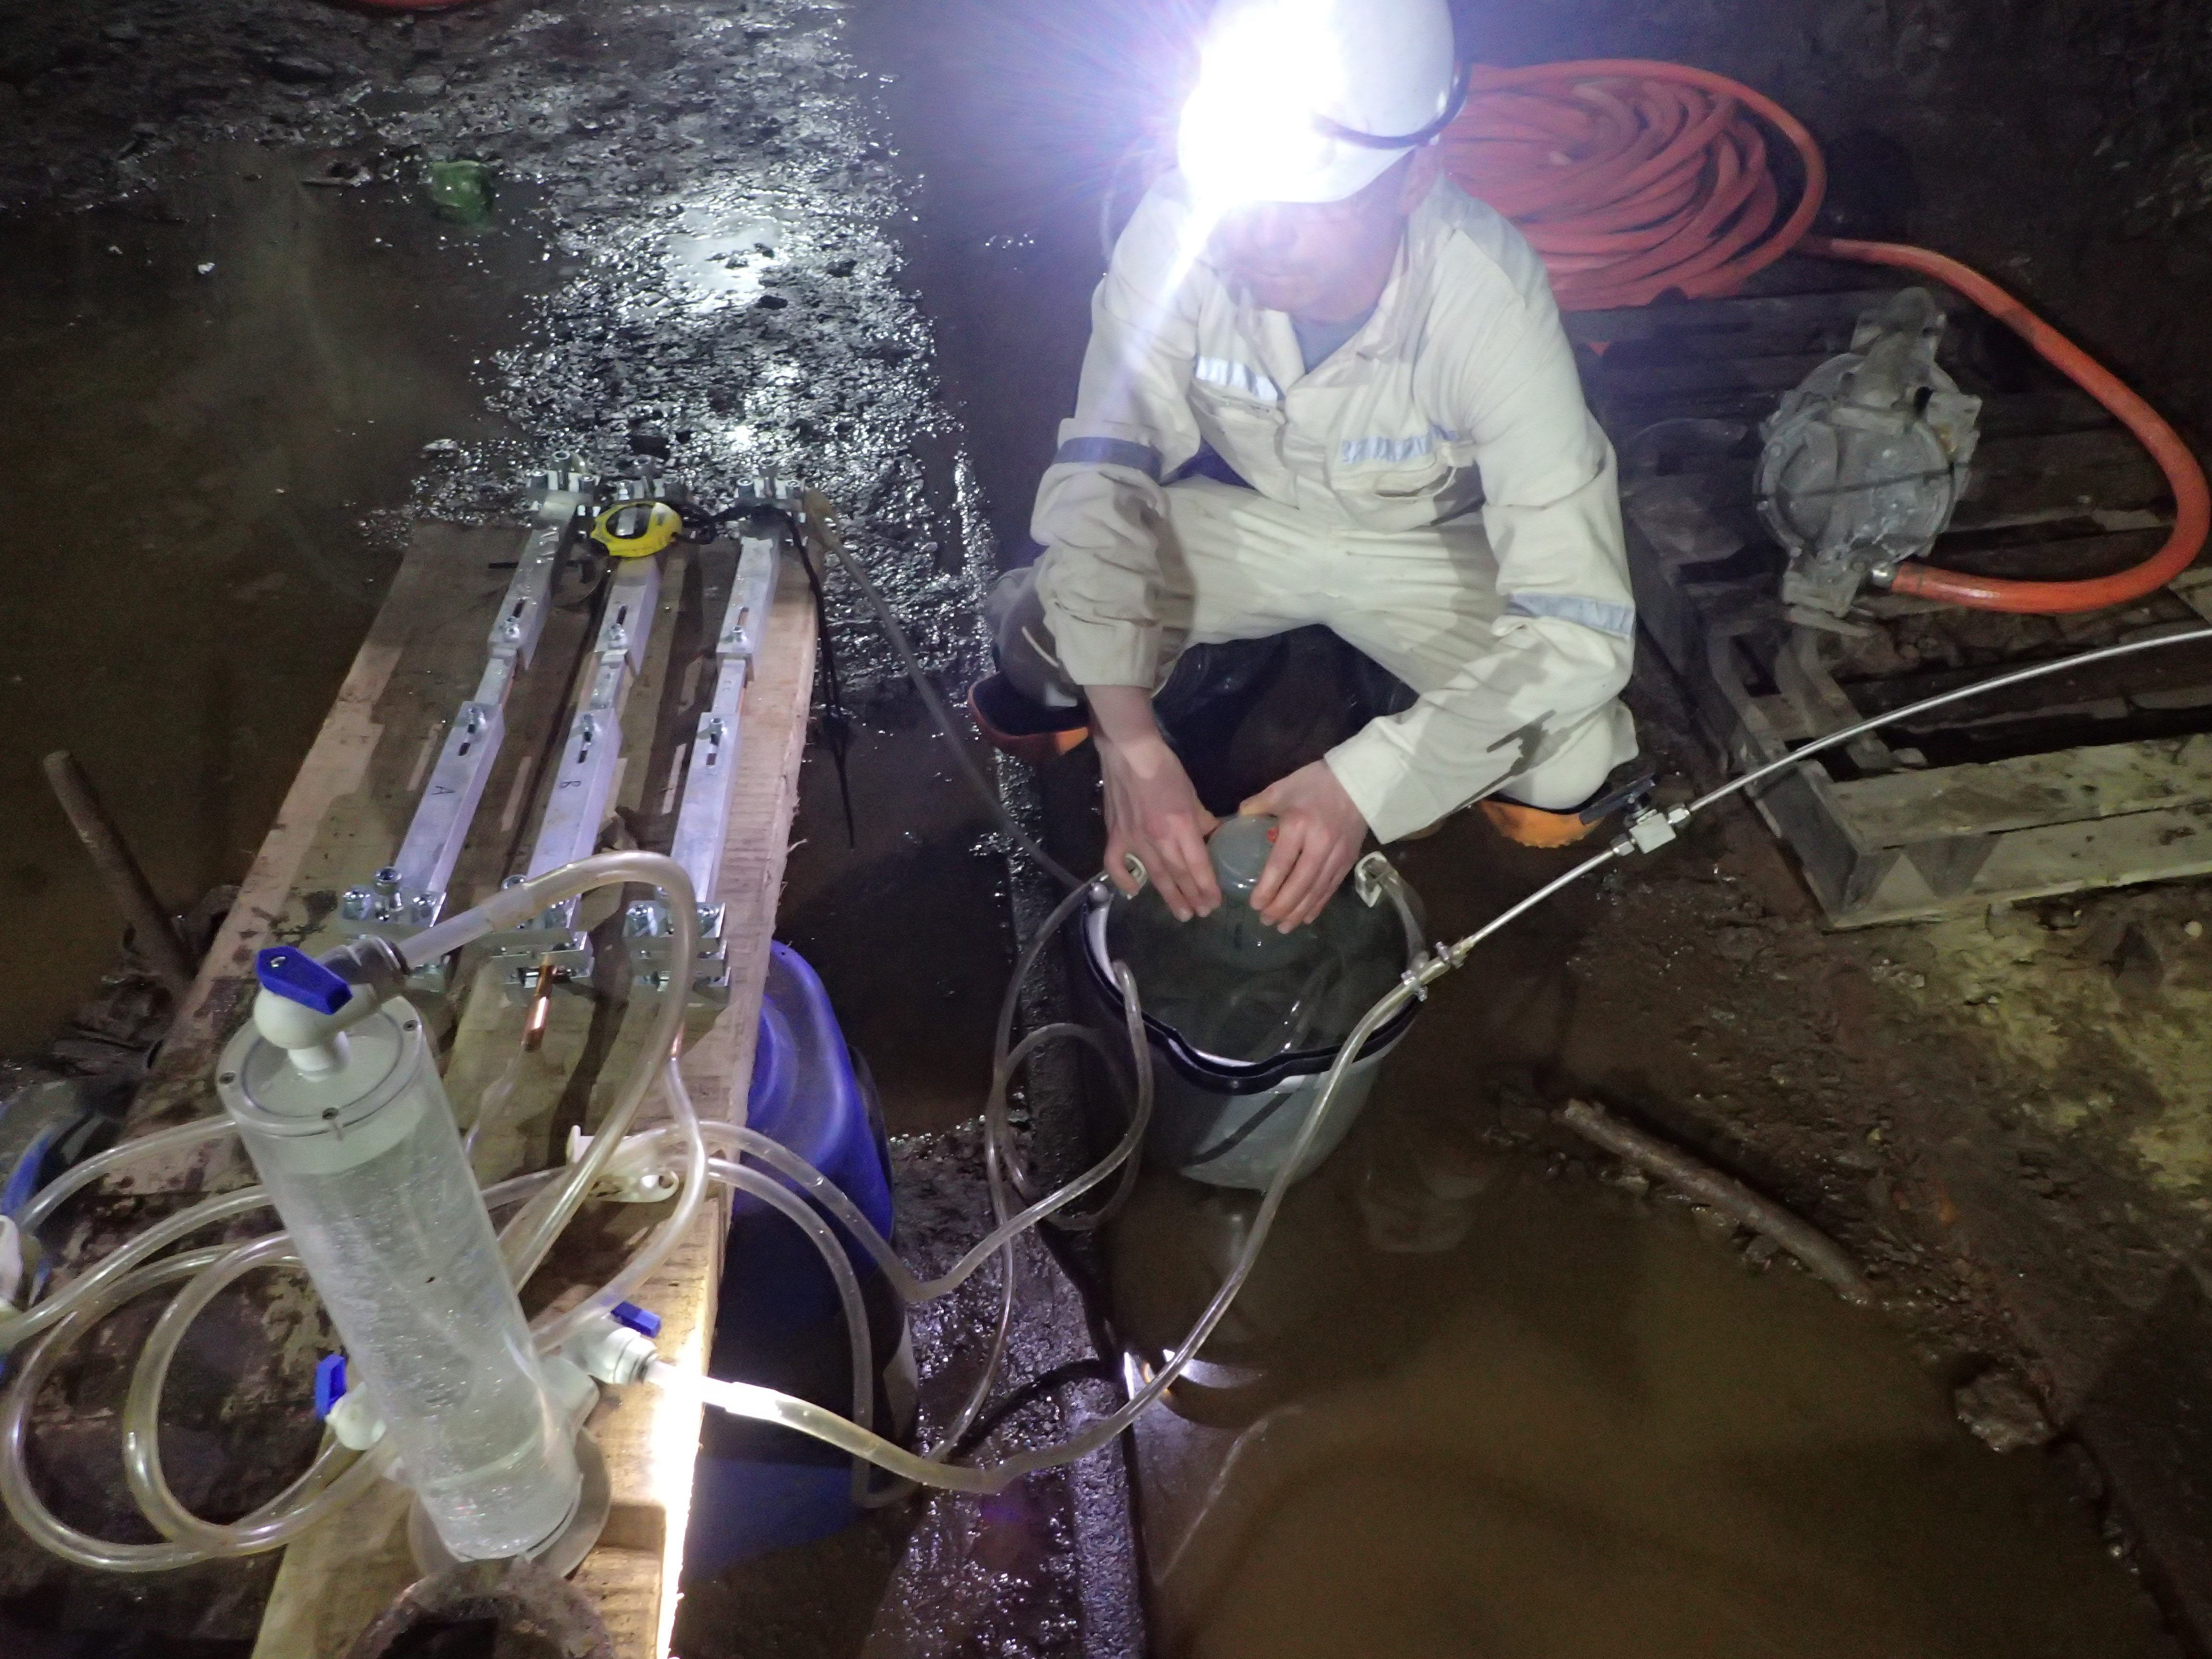  Oliver Warr standing deep inside a mine collecting water samples